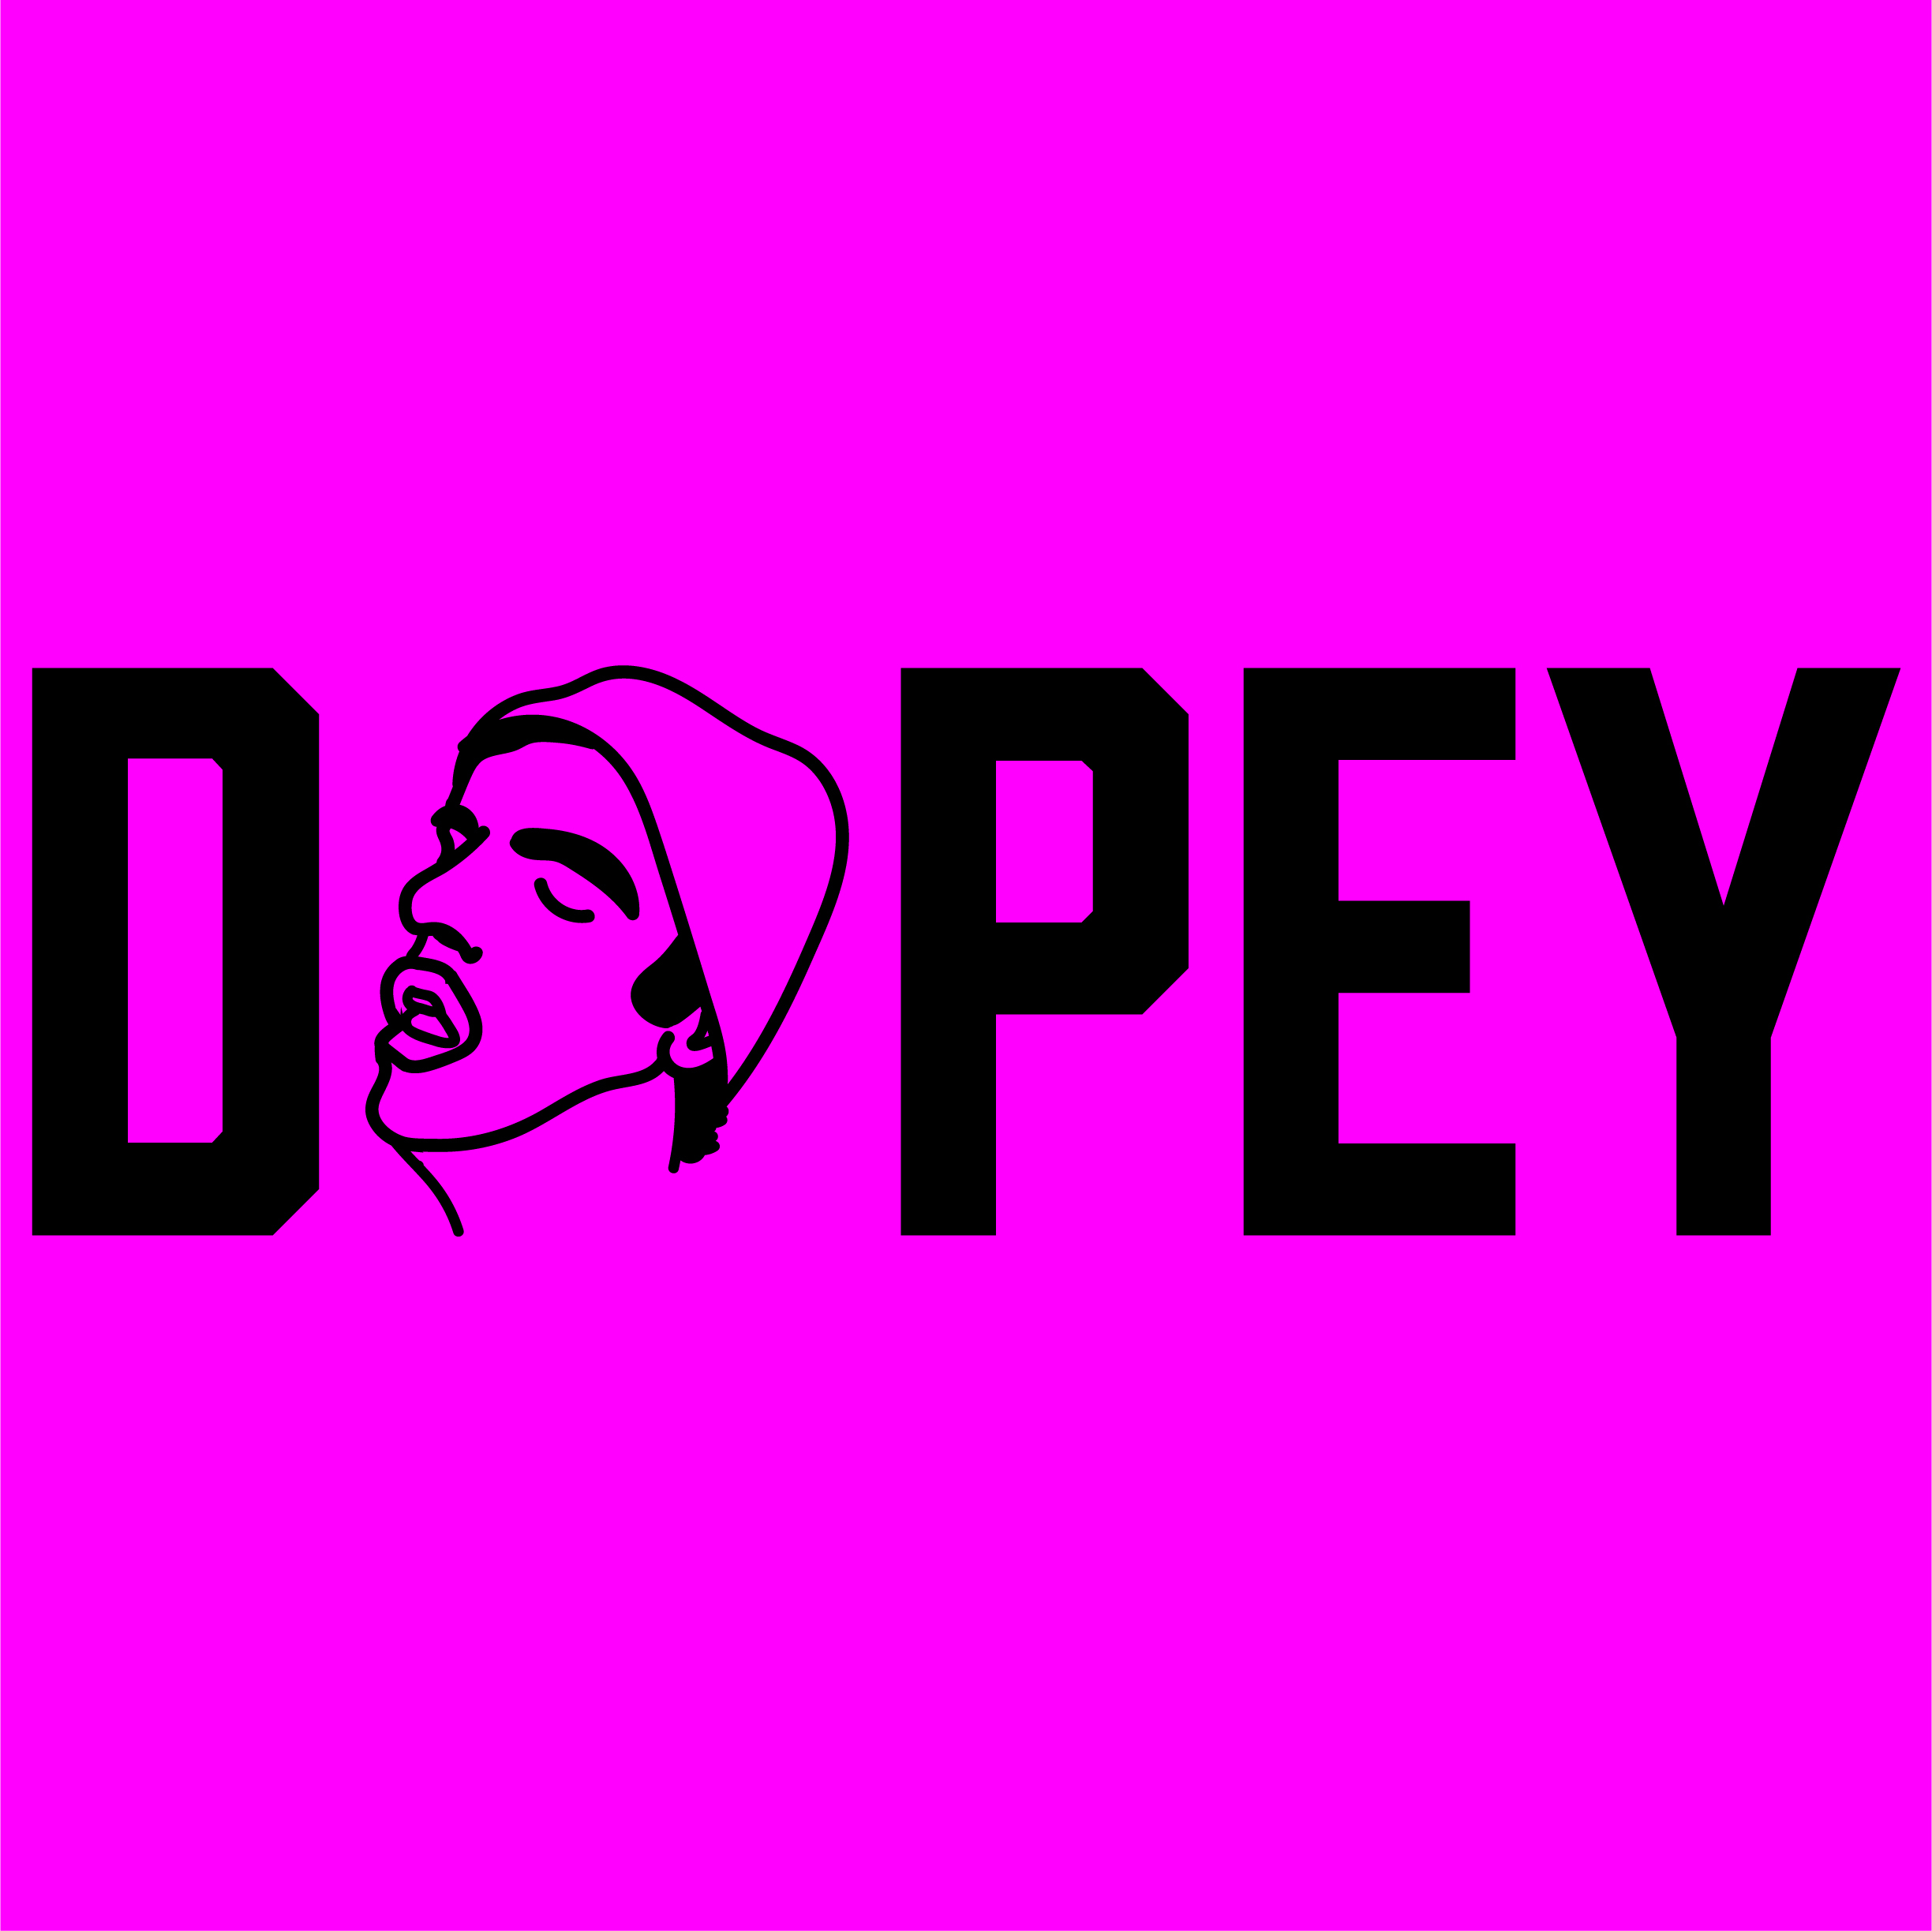 Dopey119: Expressing Sammy's Anal Glands, 3 Cars Crashed in One Day, Puking Donuts, Shooting Cocaine, Fentanyl, Dave's Dad